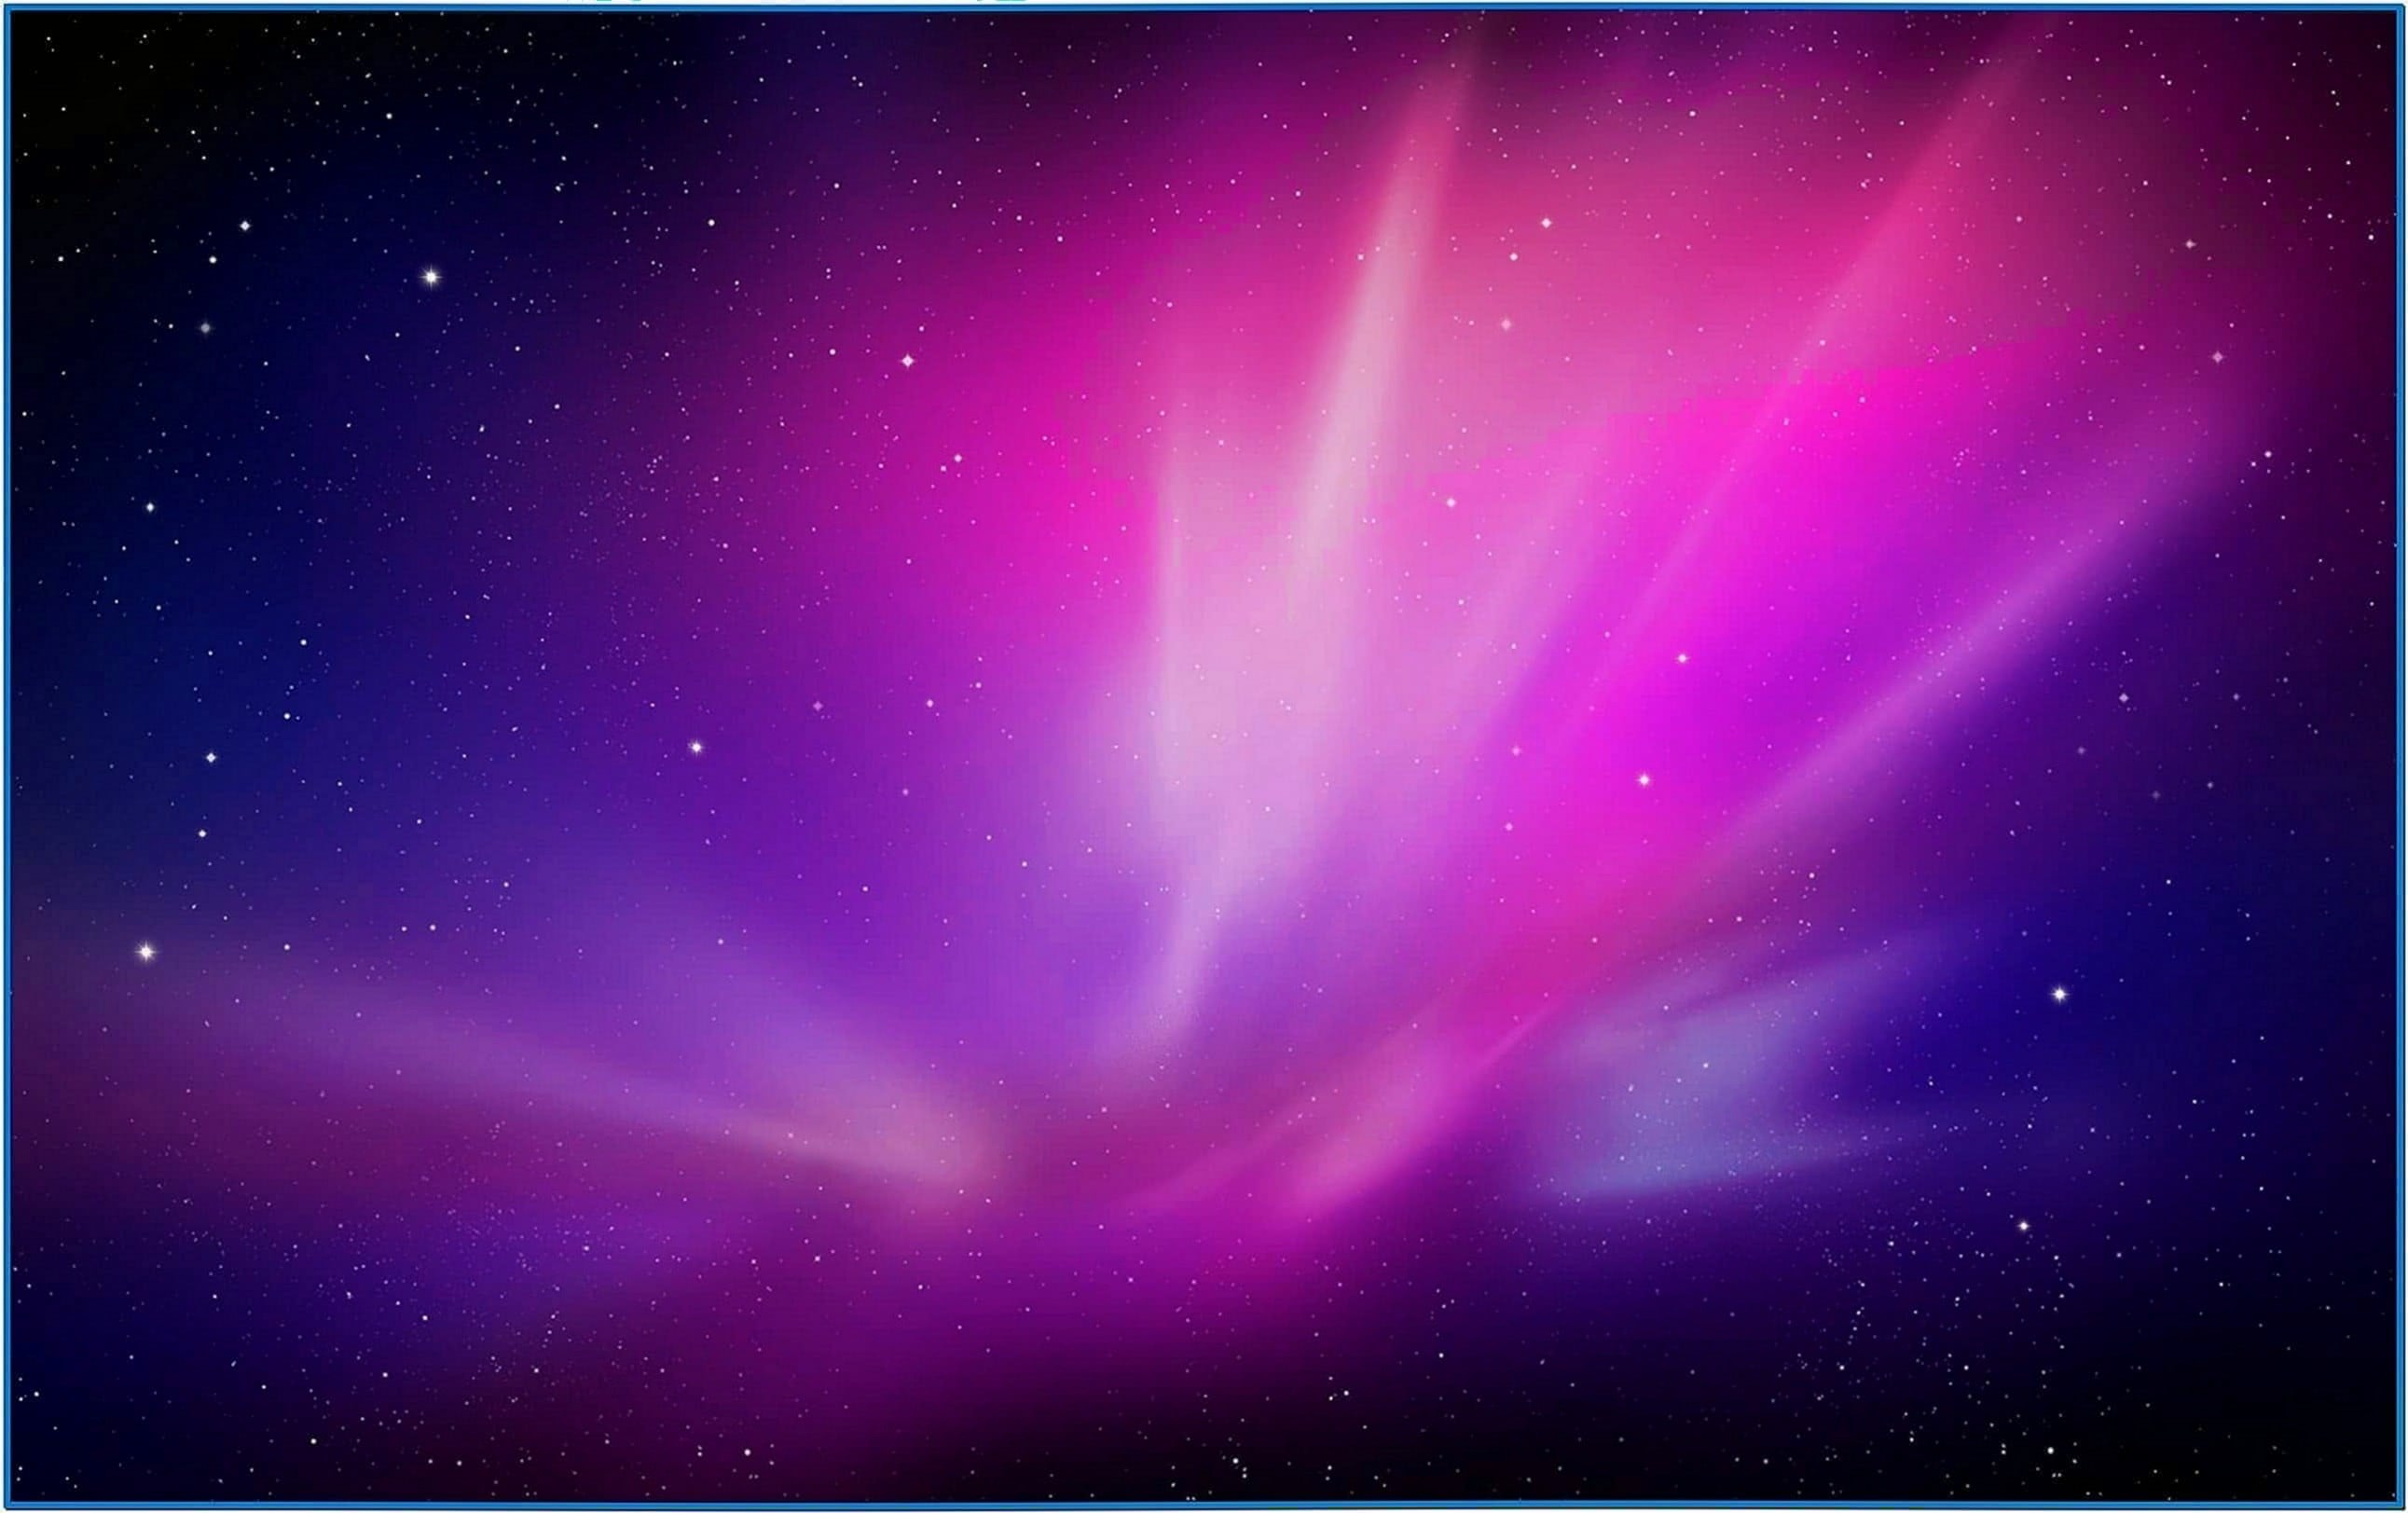 Download Wallpaper For Mac Os X